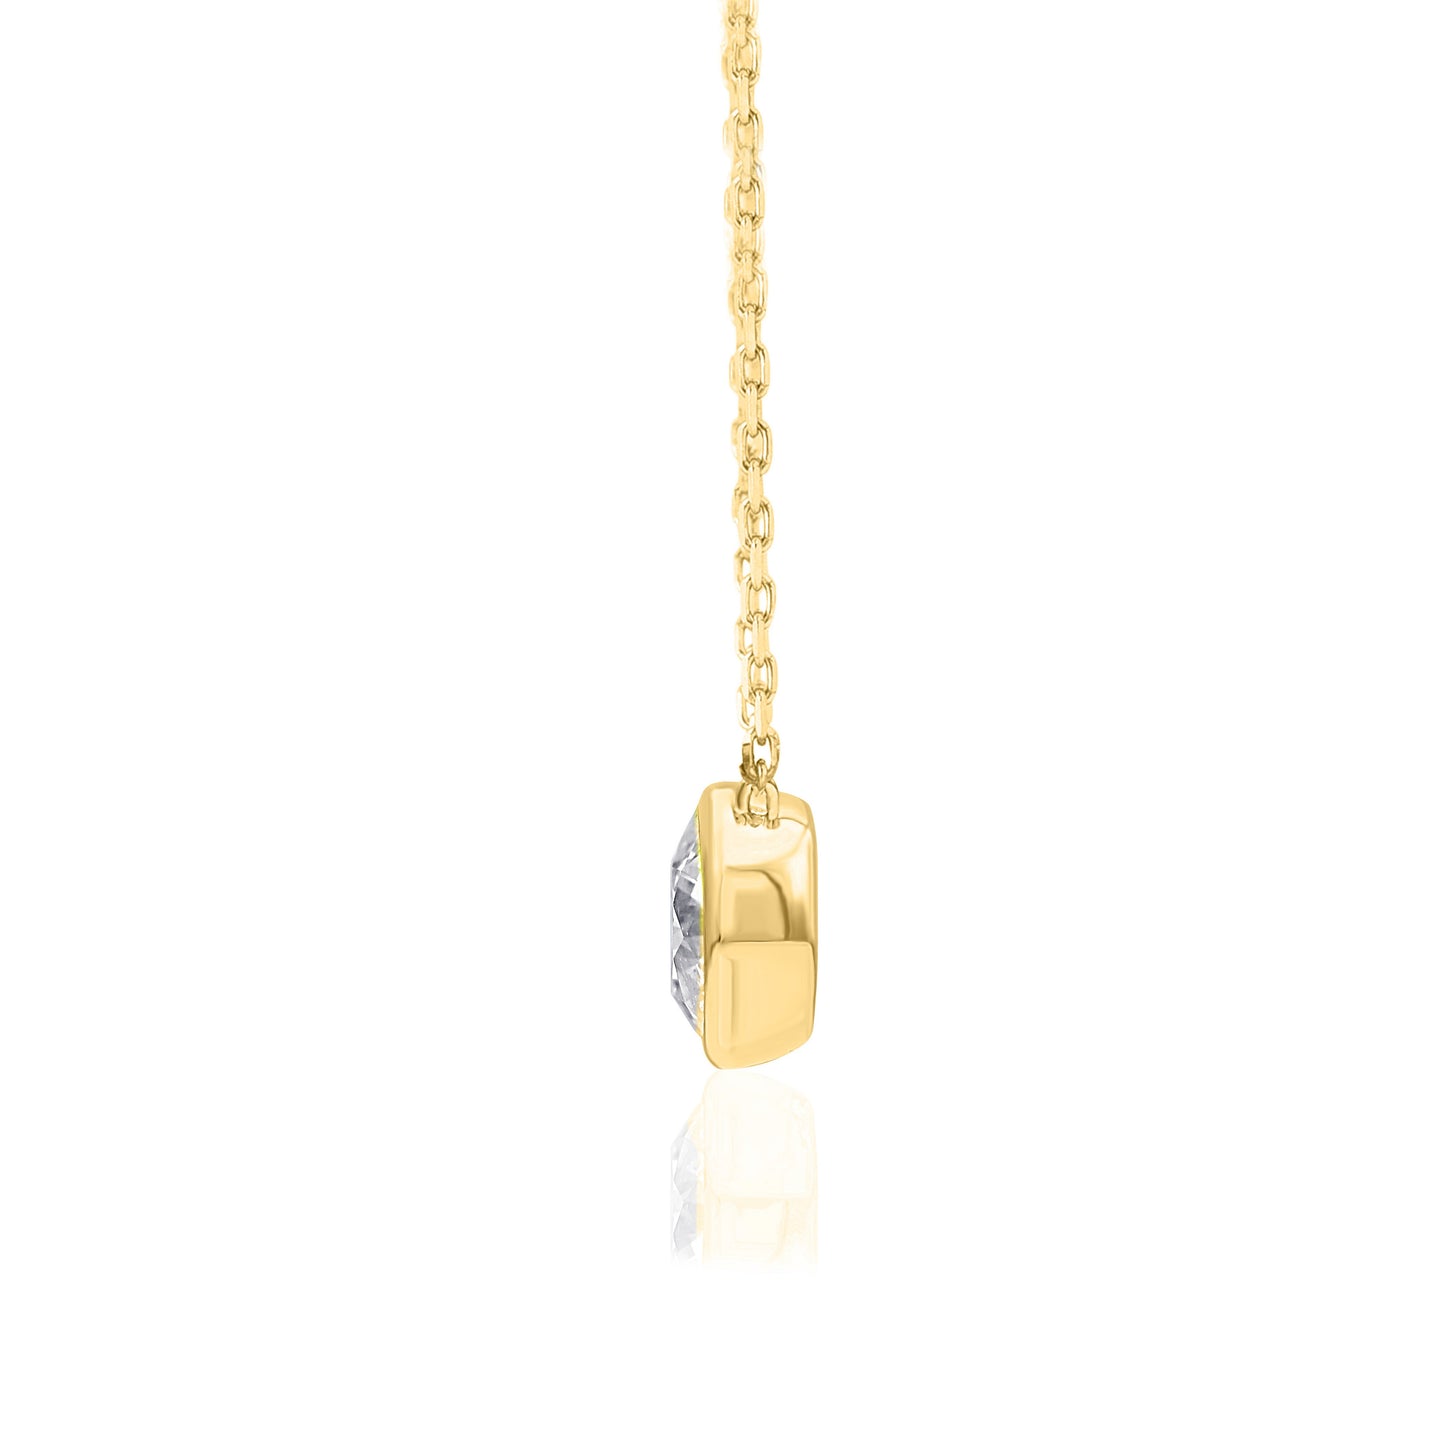 1 Carat Natural Diamond Halo Pendant Necklace in 10K Gold